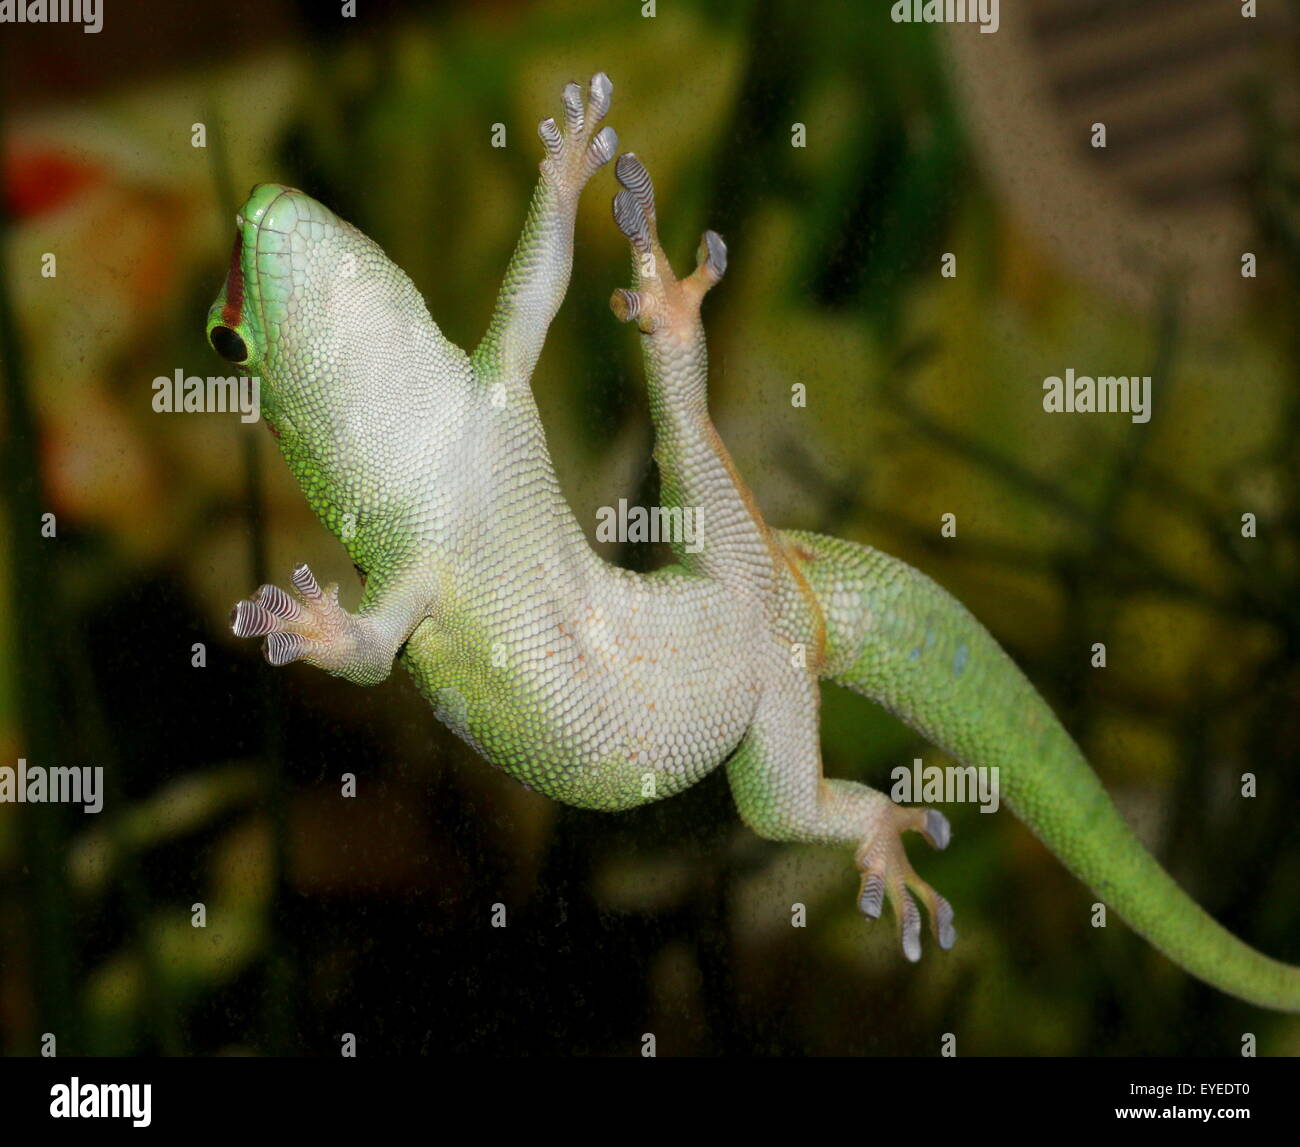 Green Madagascar Day Gecko (Phelsuma madagascariensis) clinging to a (dirty) glass window with his sticky toe pads Stock Photo